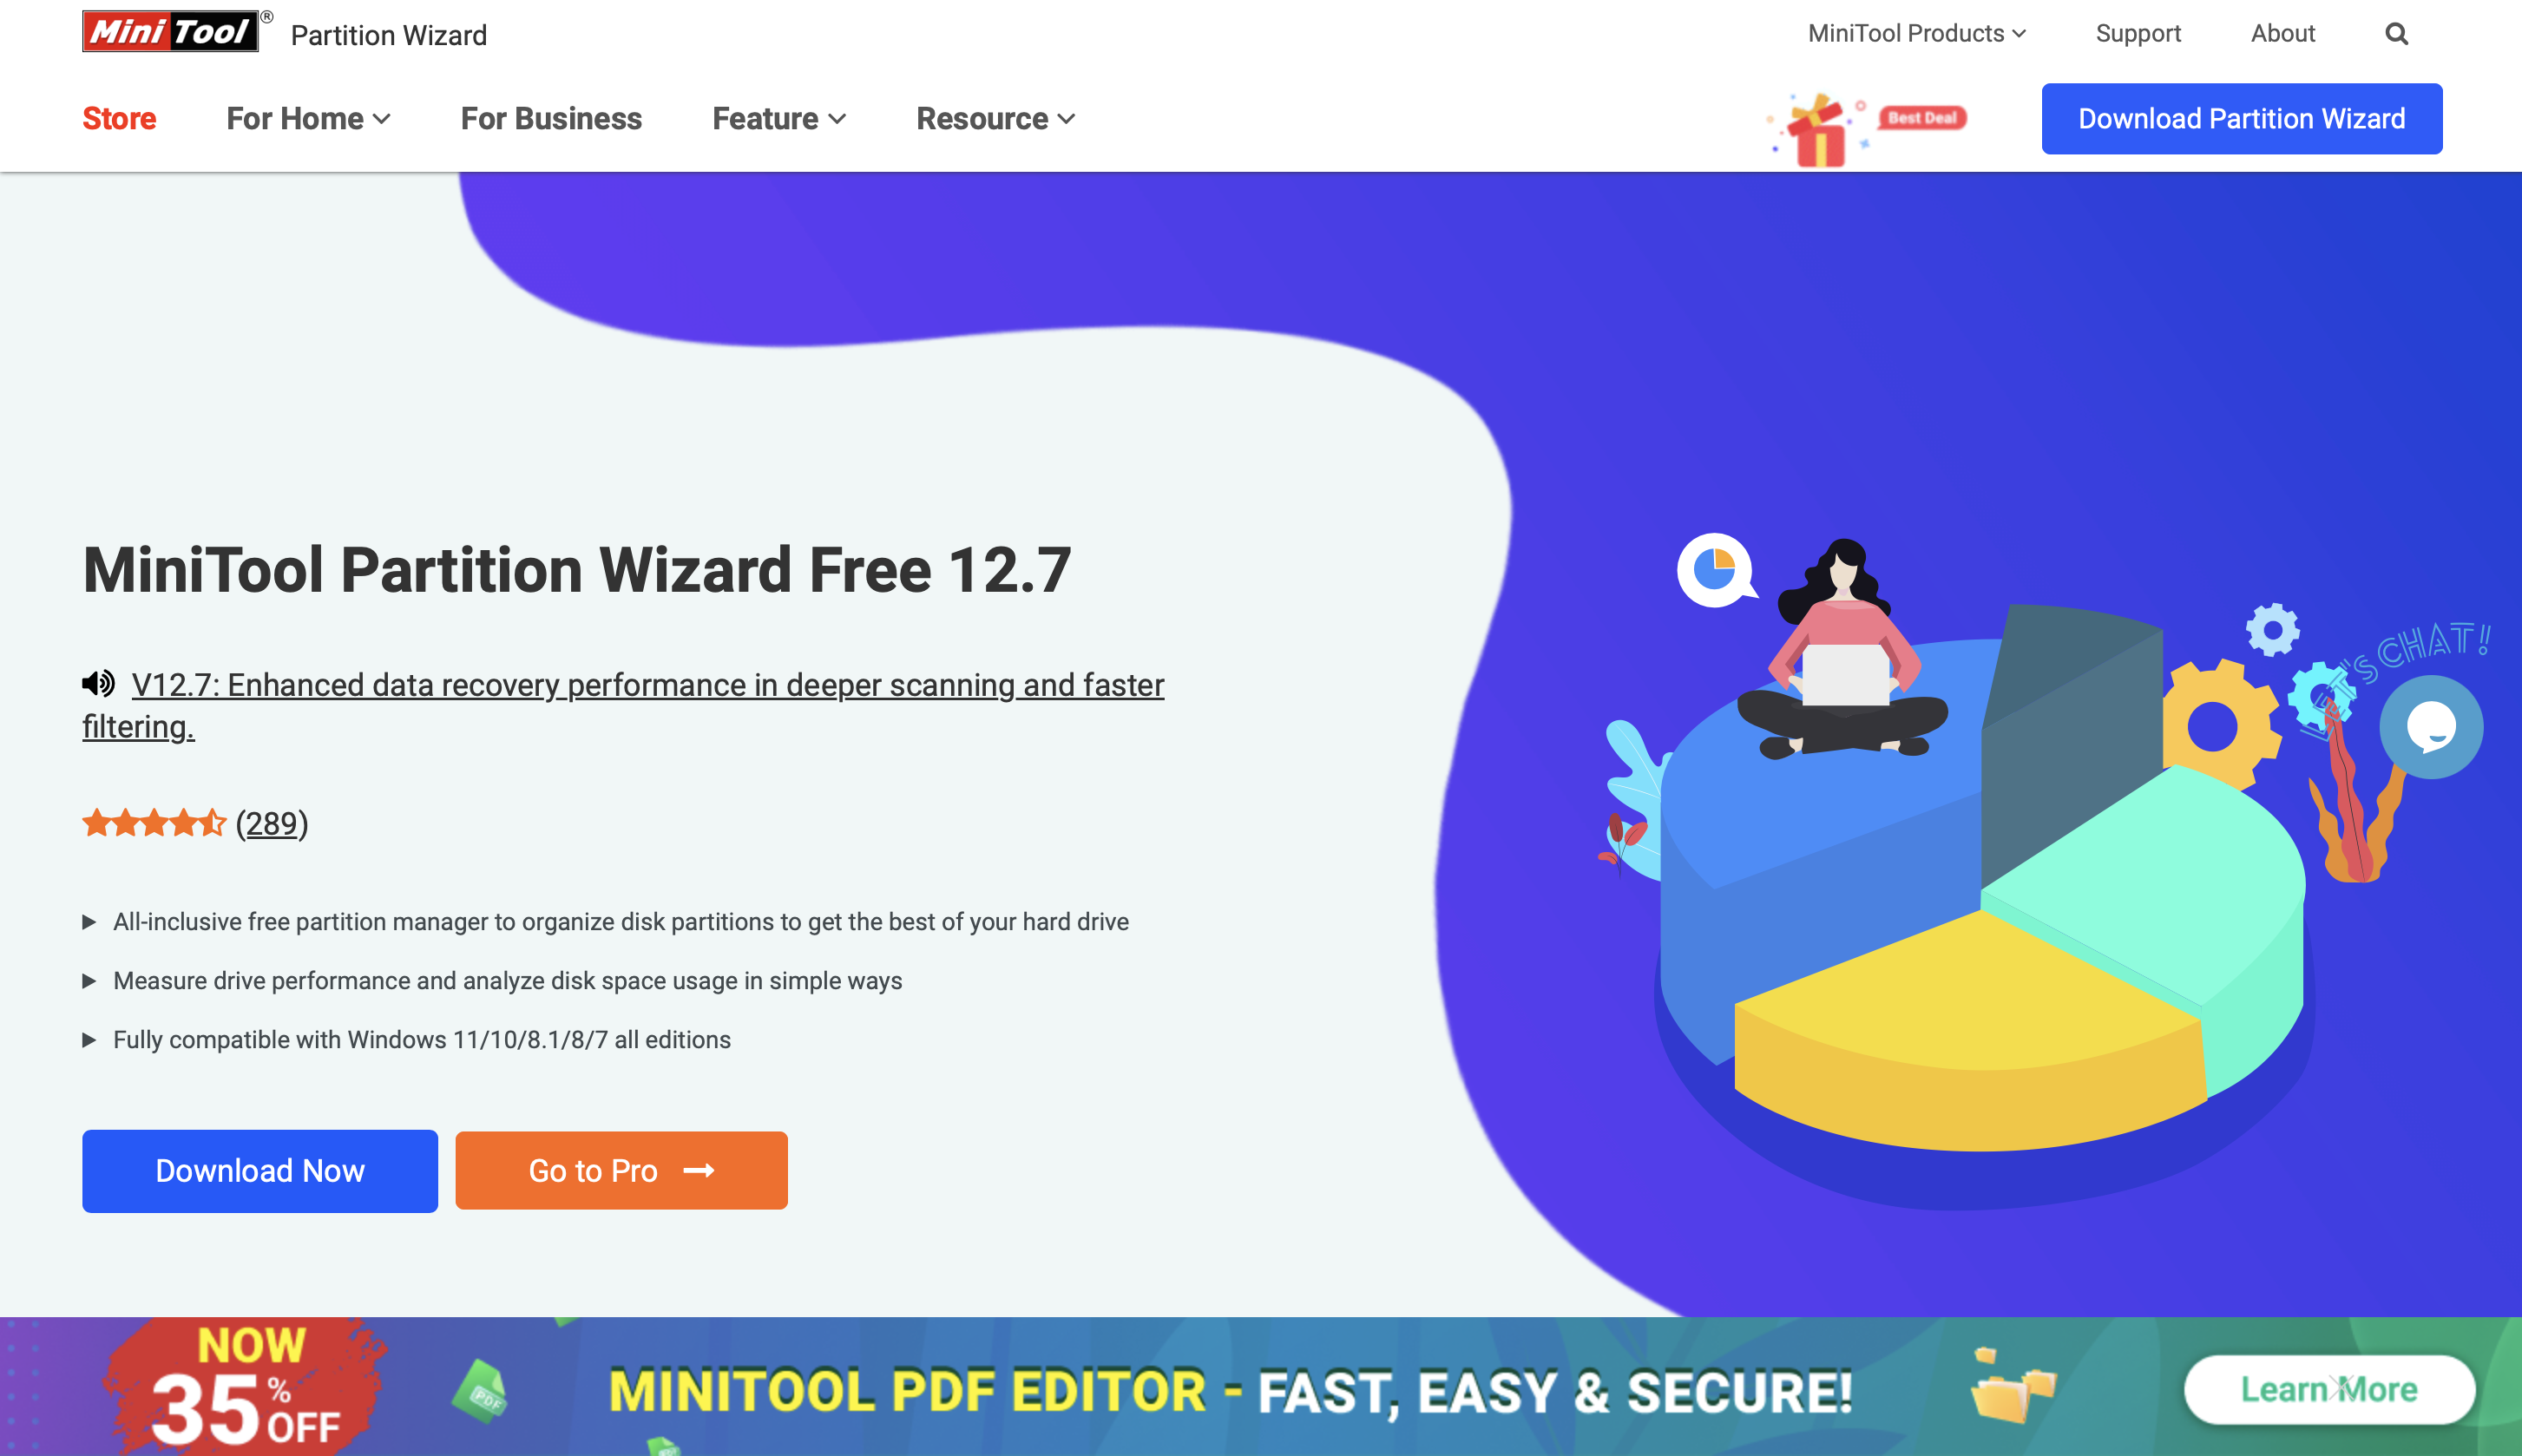 Wizard Partition MiniTool